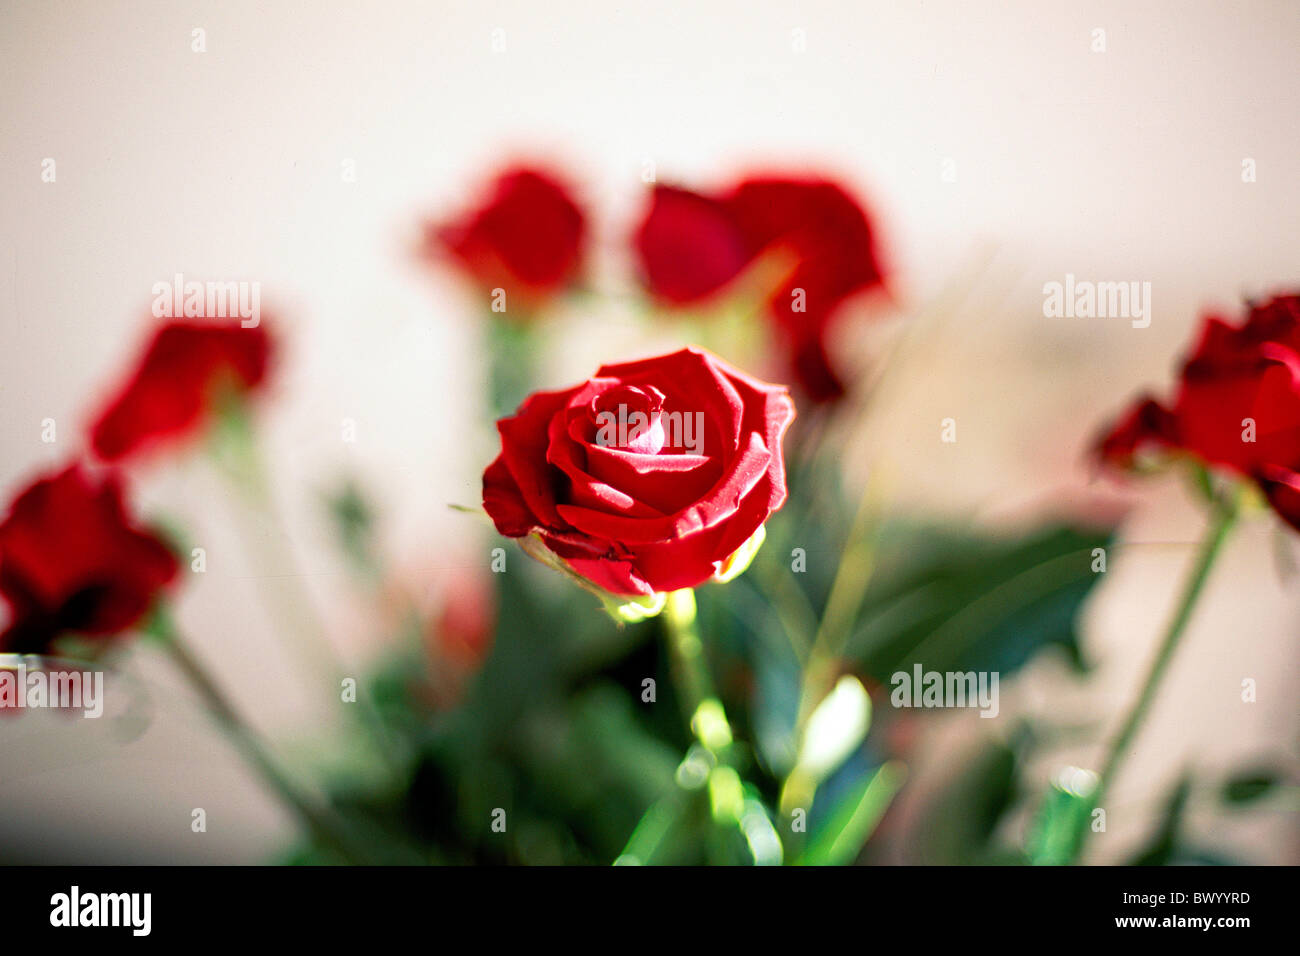 bouquet bouquets blossom flourish background flowers blurred inside roses red Stock Photo